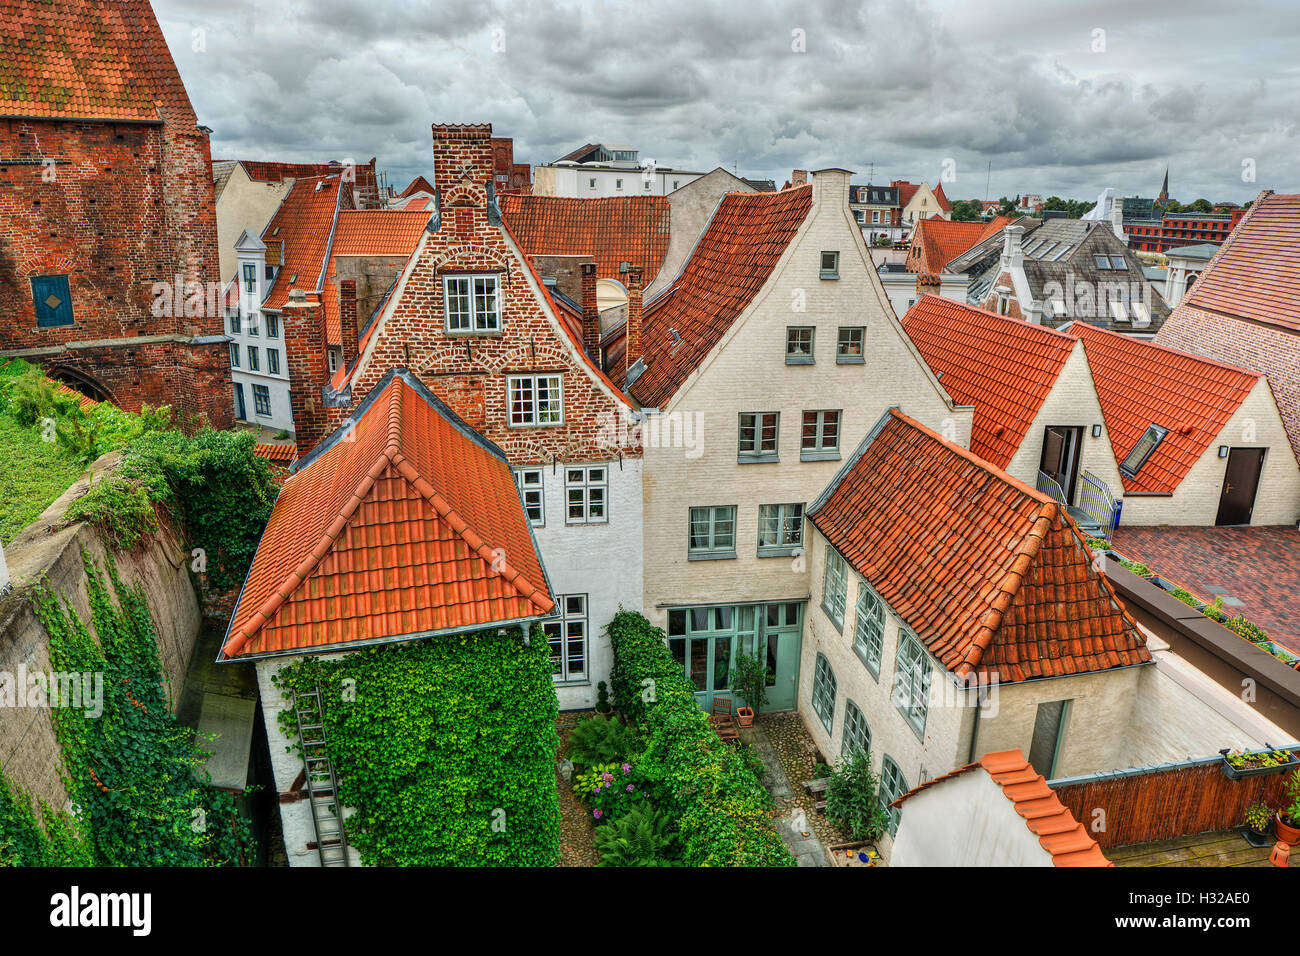 August 2016, typical buildings in Lübeck (Germany), HDR-technique Stock Photo